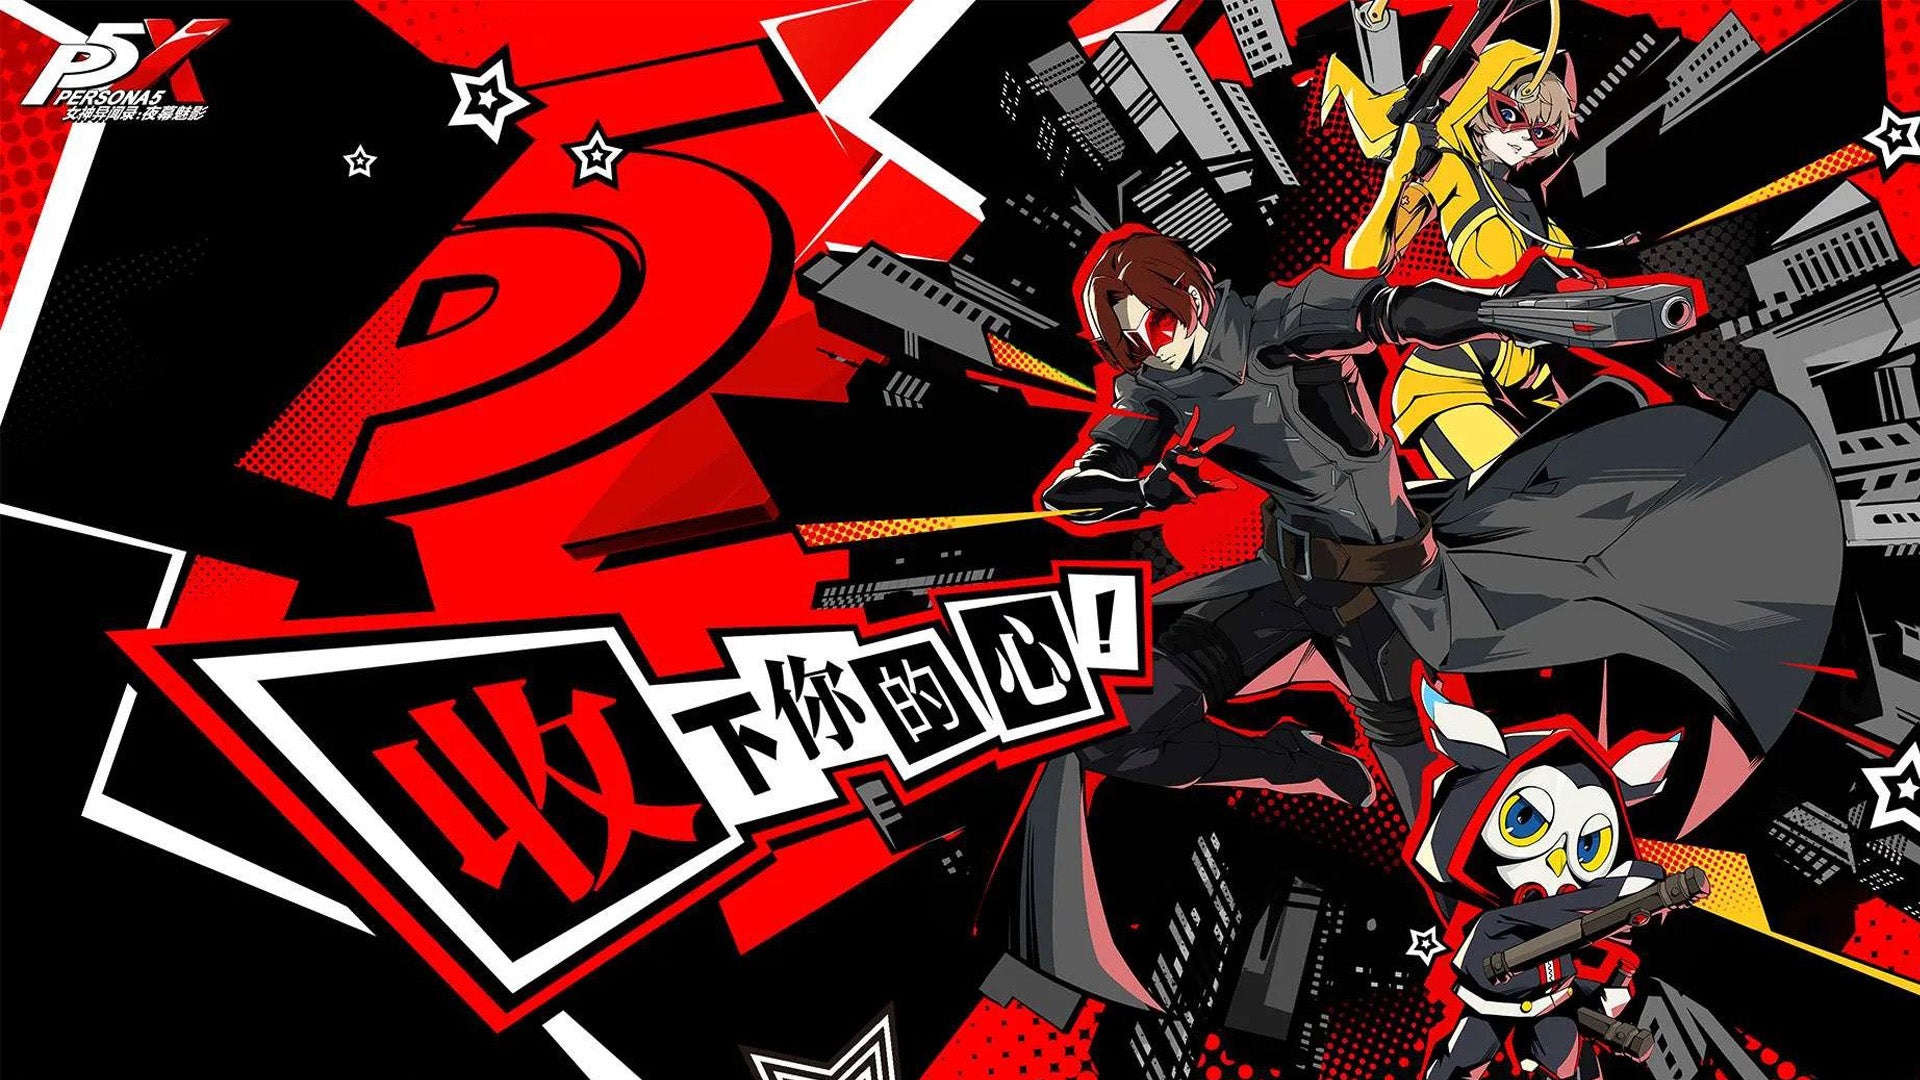 Image for Persona 5 is getting a mobile spin-off with a new cast of characters